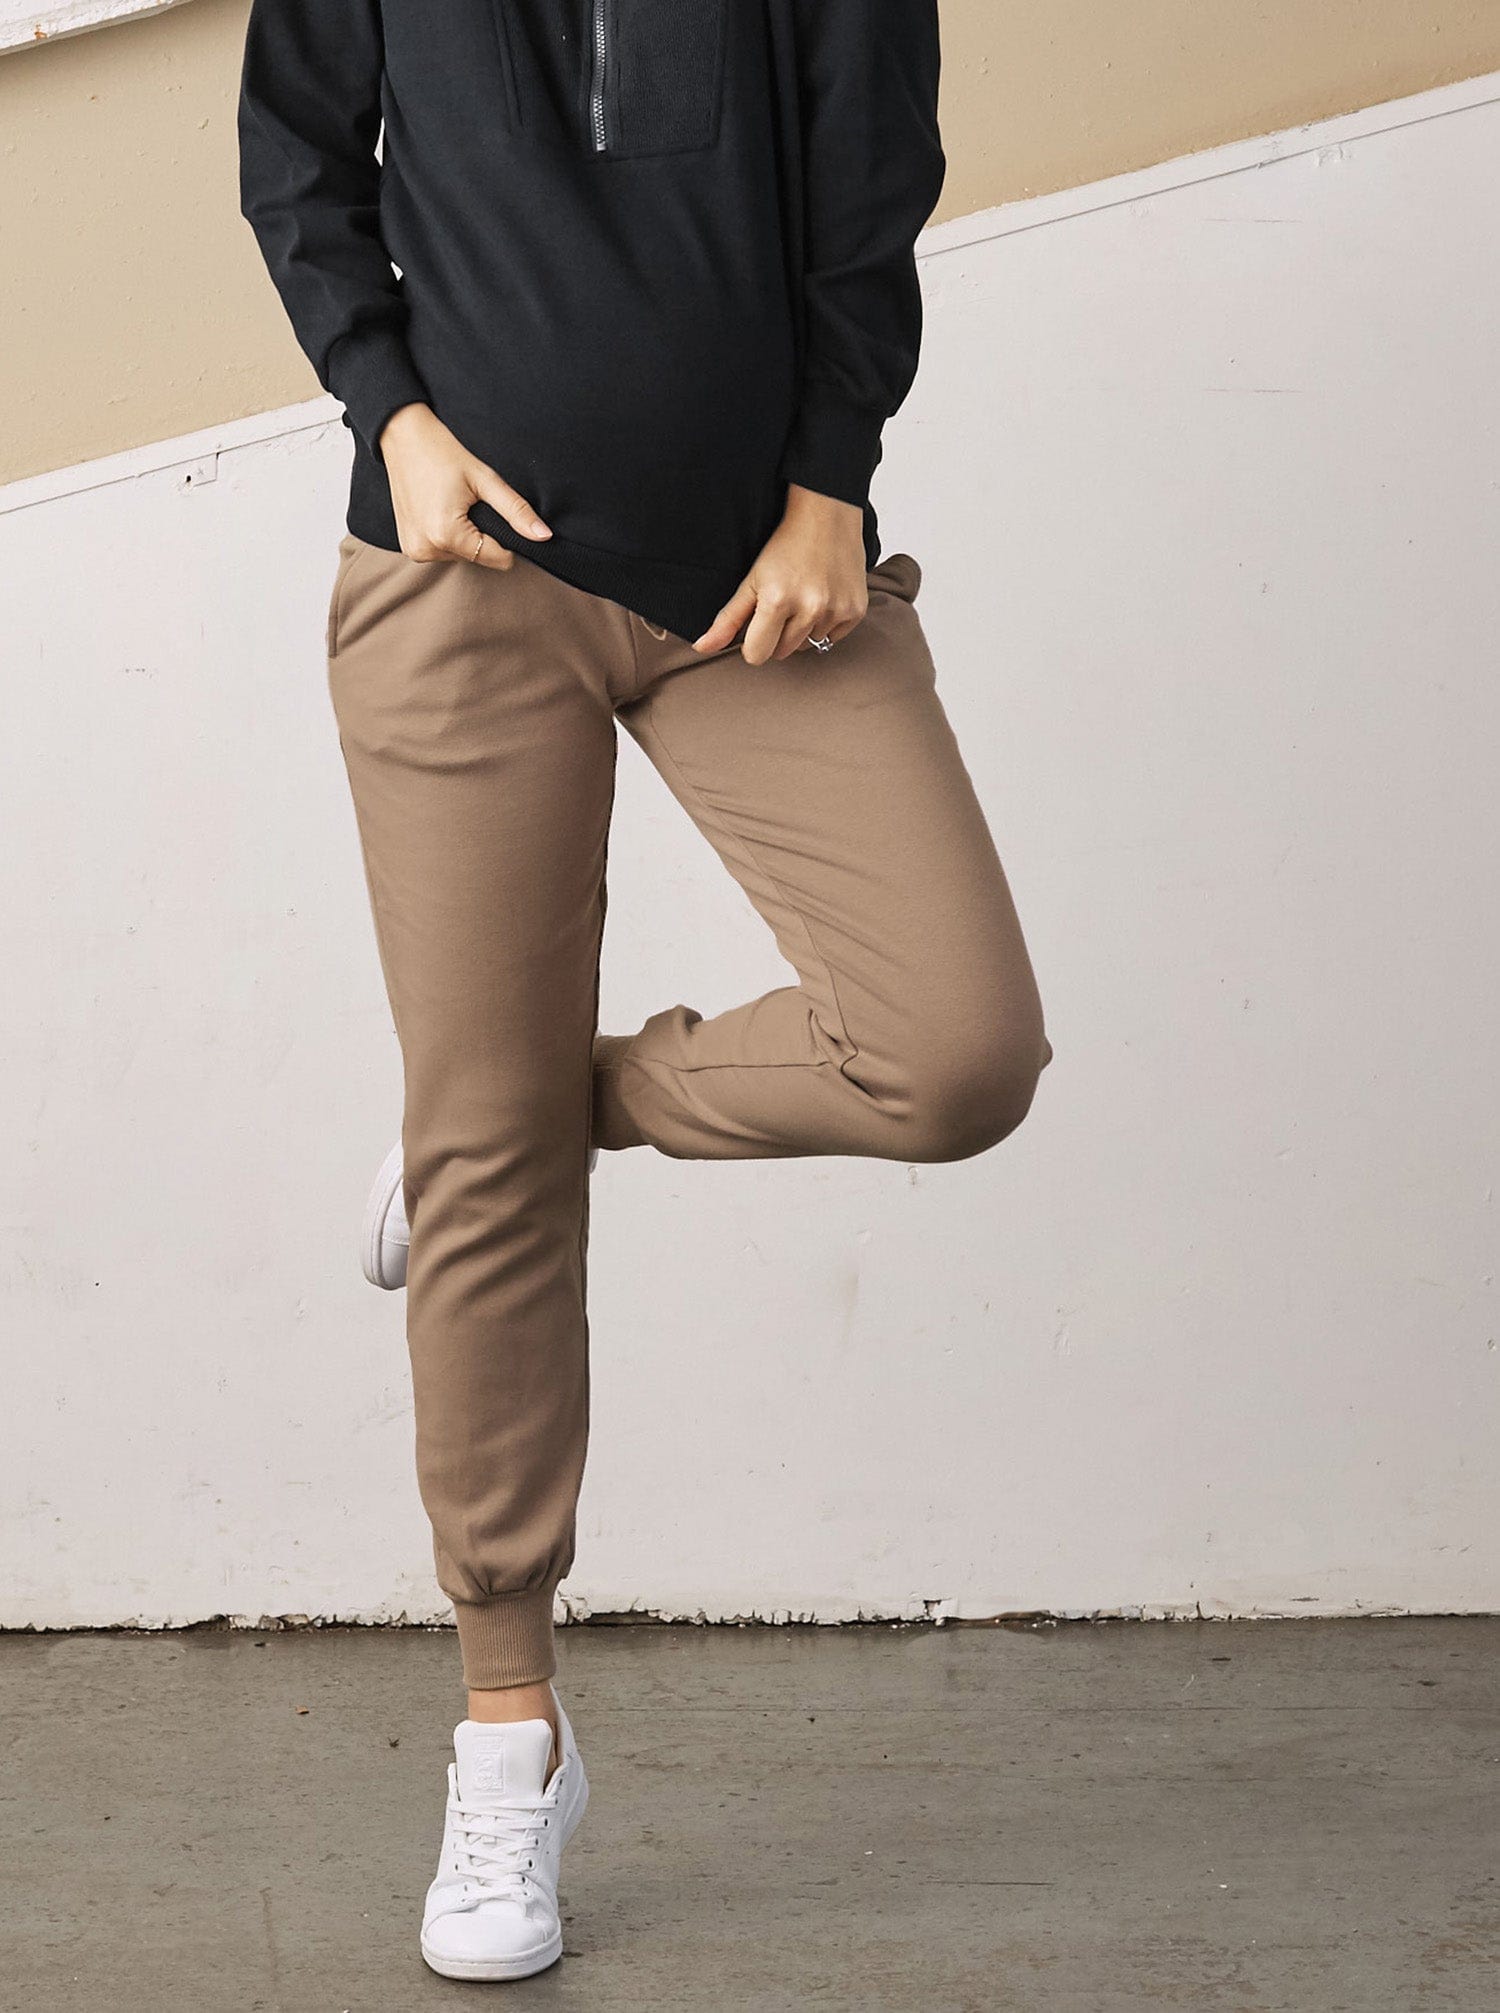 Main View - A Pregnant Woman in Calla Maternity Cotton Sweatpants in Iced Coffee Color from Angel Maternity (6728293679198)